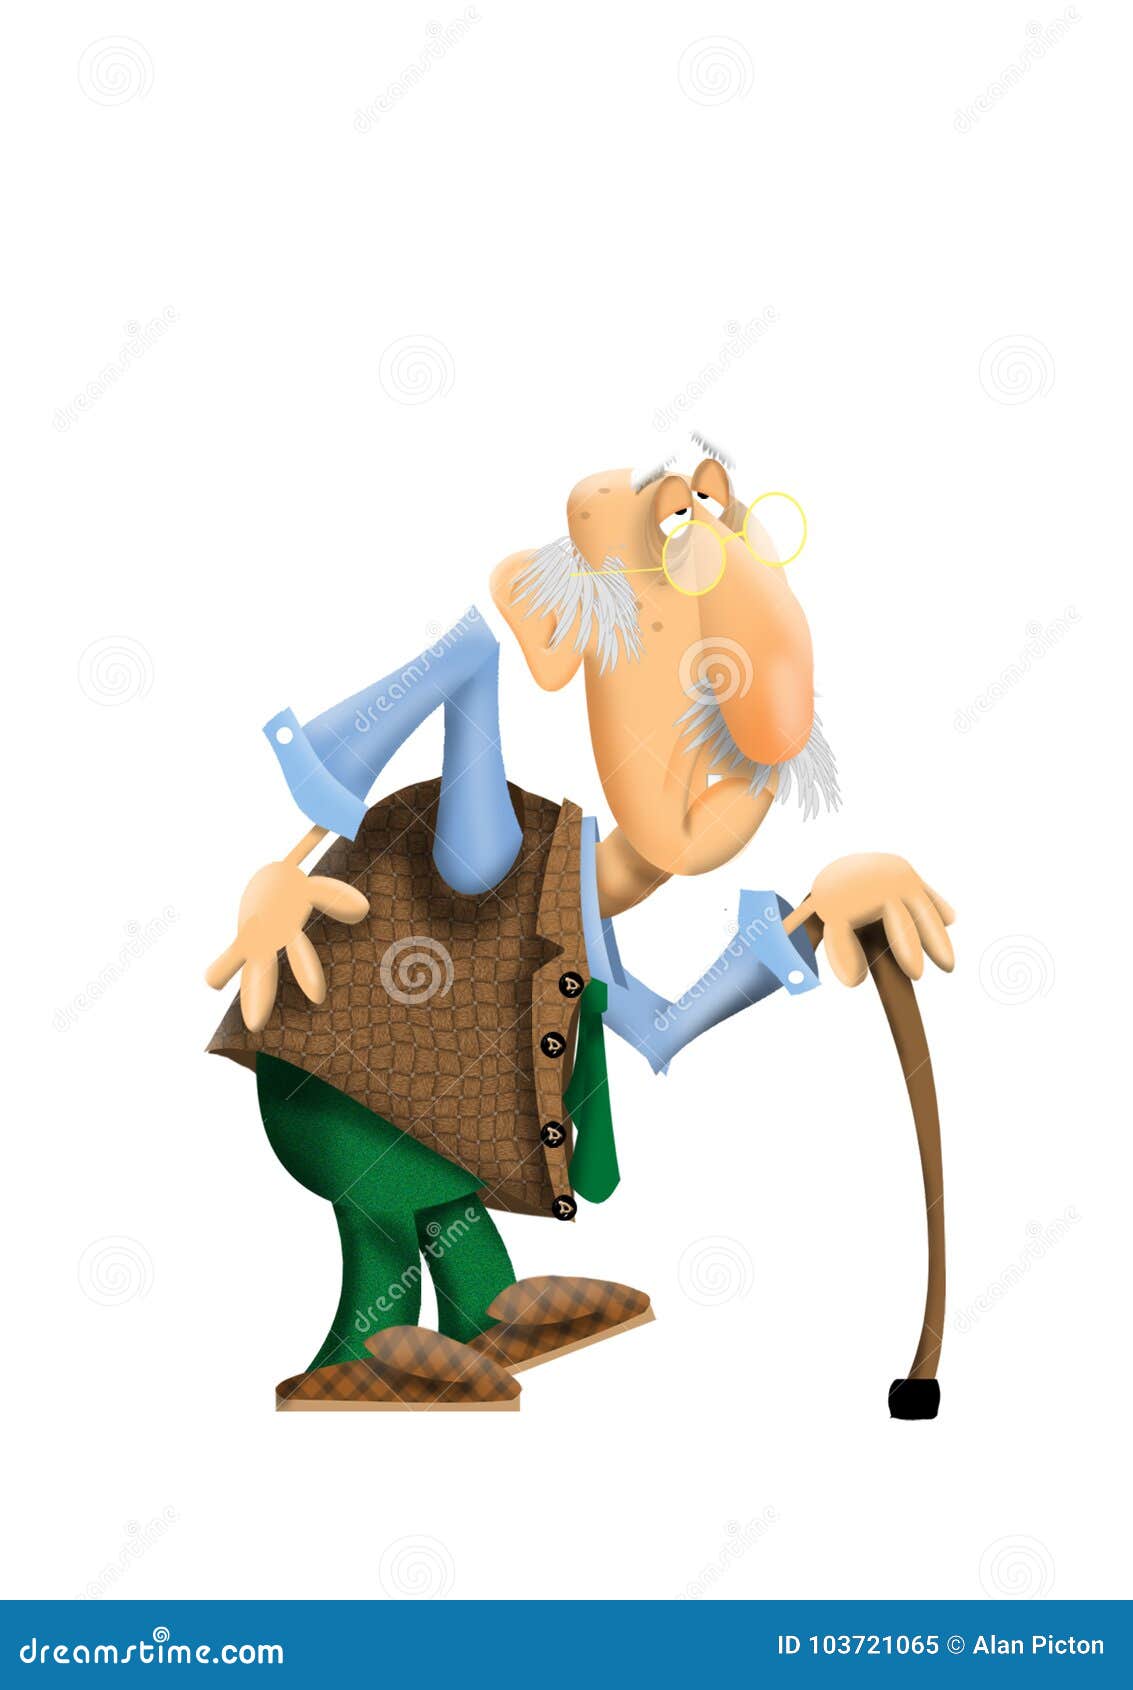 cartoon of very old man with a bad back